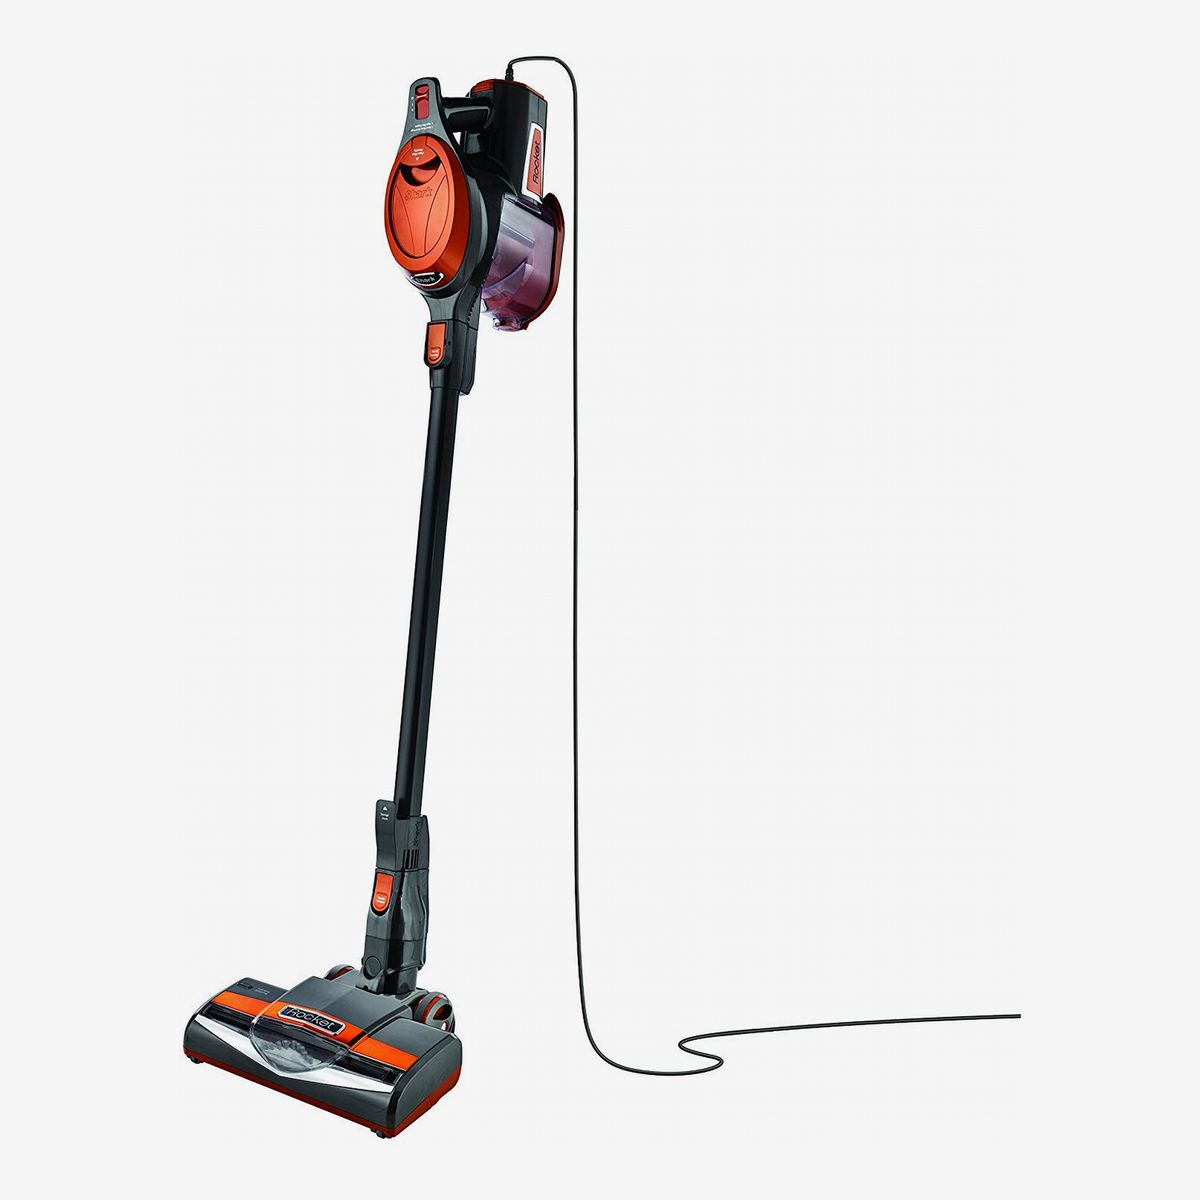 18 Best Vacuums For Pet Hair 2021 The, Shark Vacuum For Pet Hair And Hardwood Floors